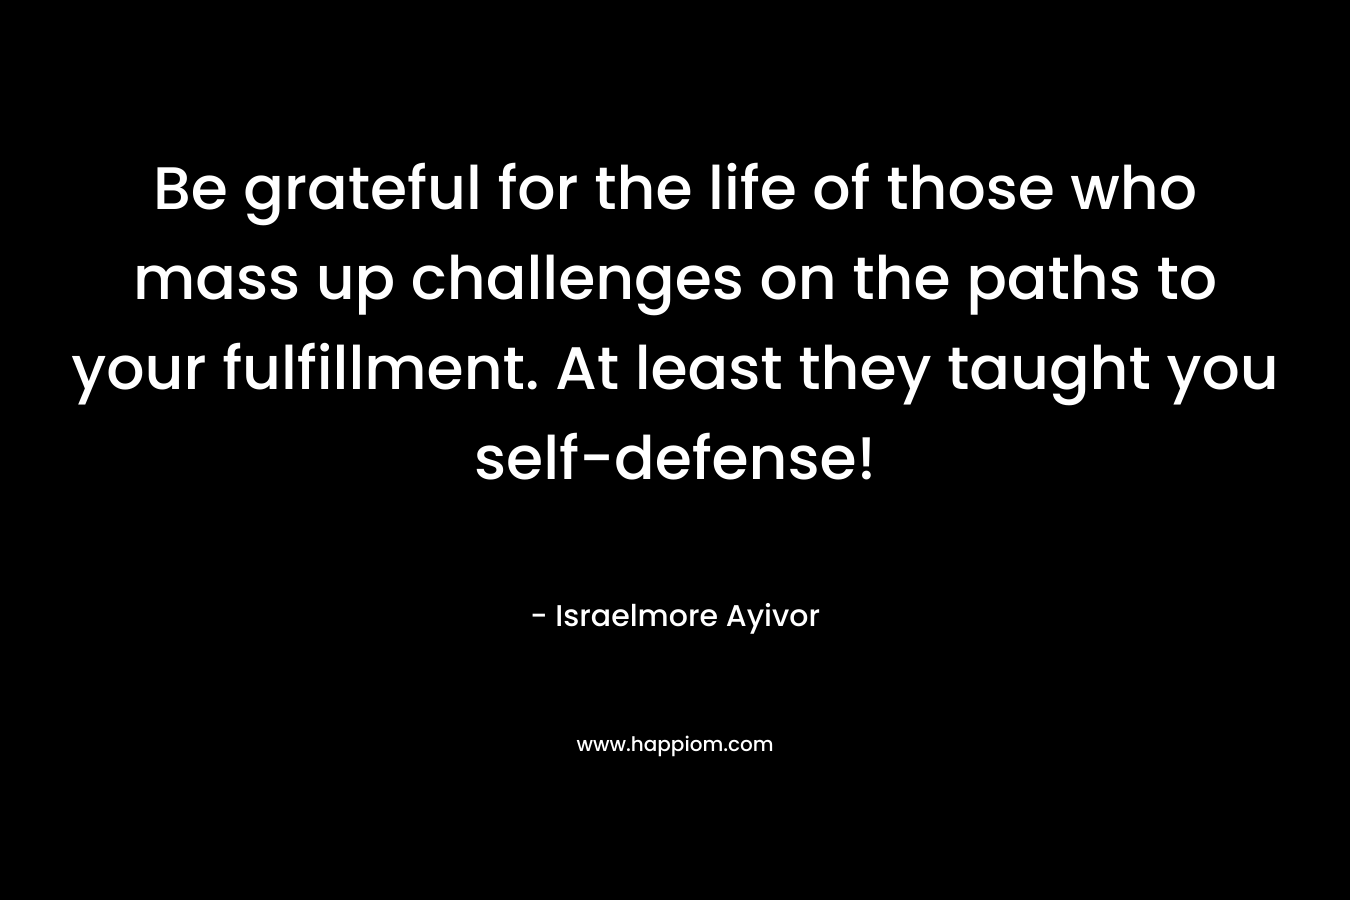 Be grateful for the life of those who mass up challenges on the paths to your fulfillment. At least they taught you self-defense!